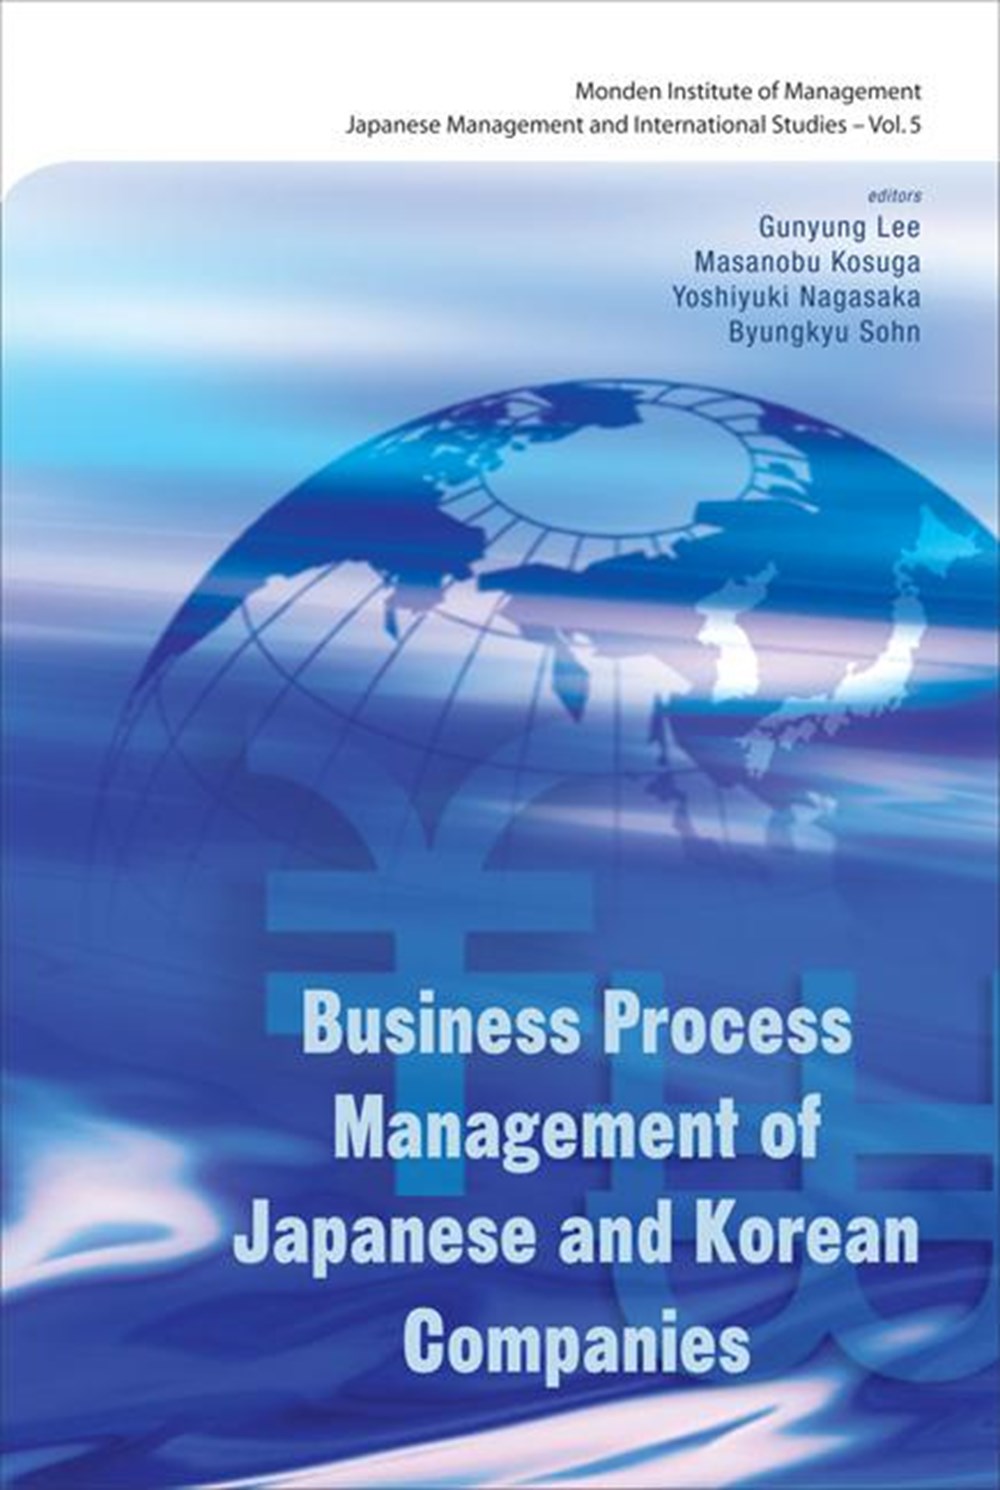 Business Process Management of Japanese and Korean Companies